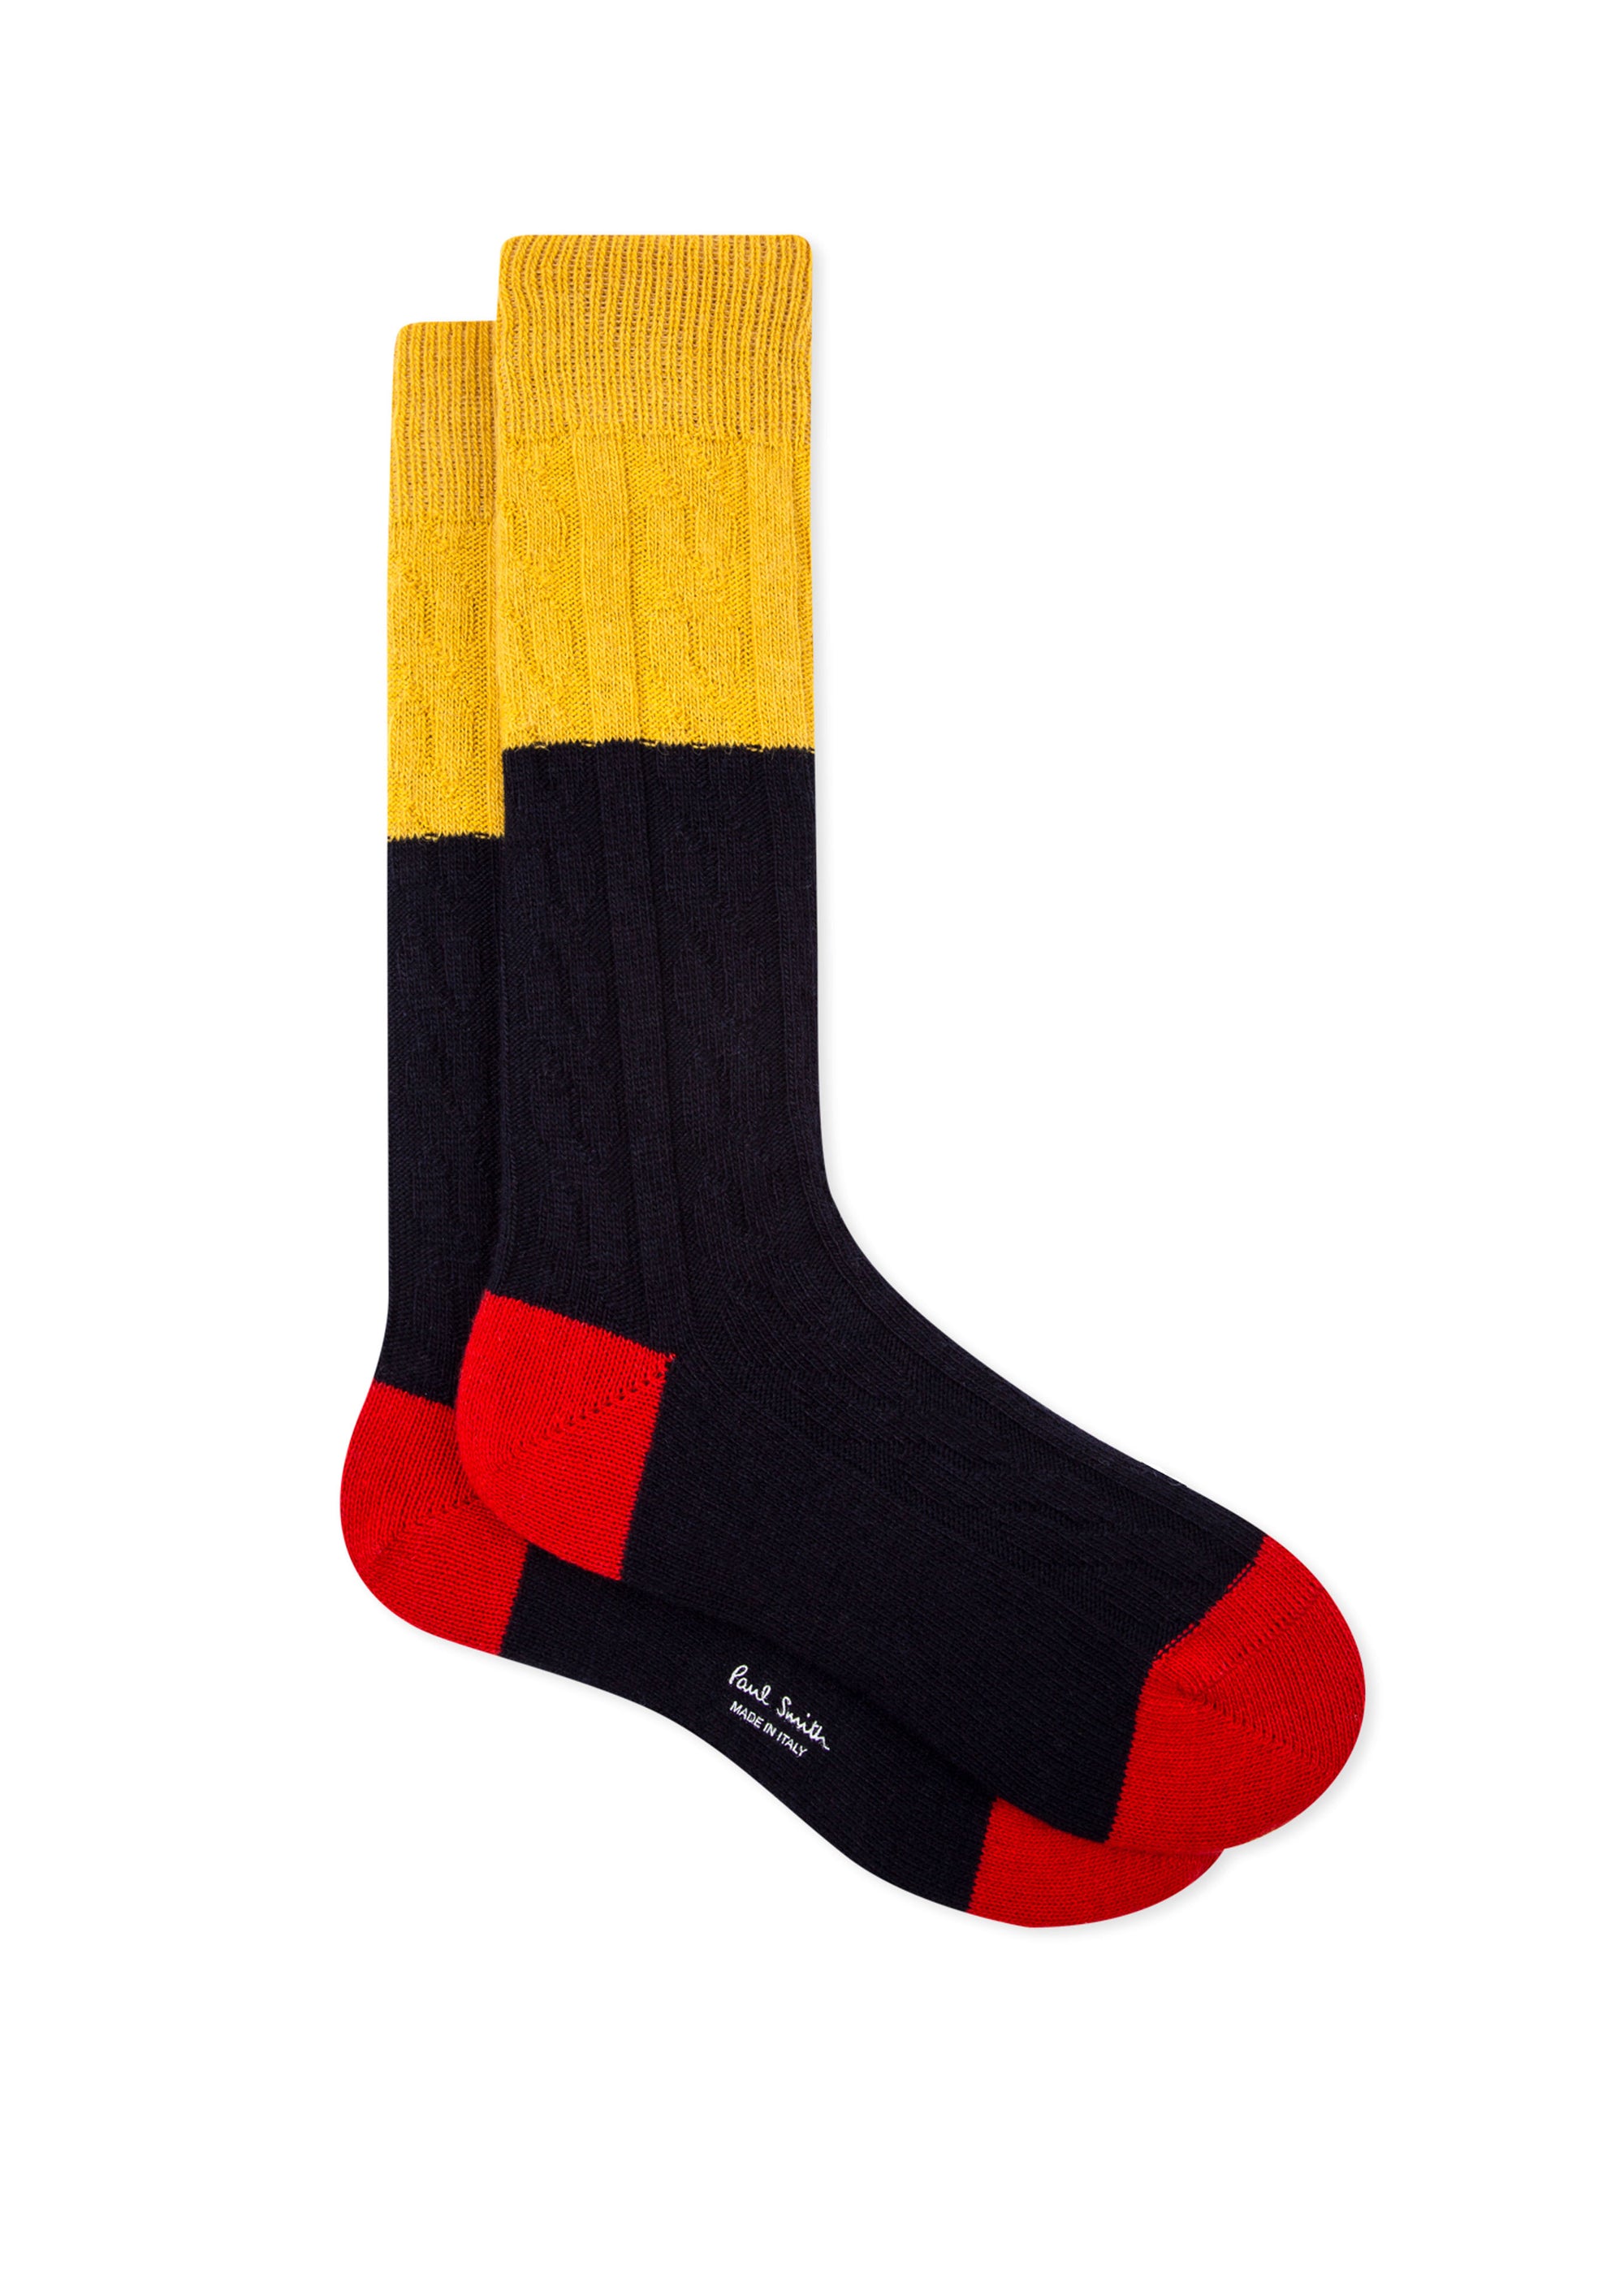 PAUL SMITH Colour Block Cable Knit Socks in Yellow / Navy